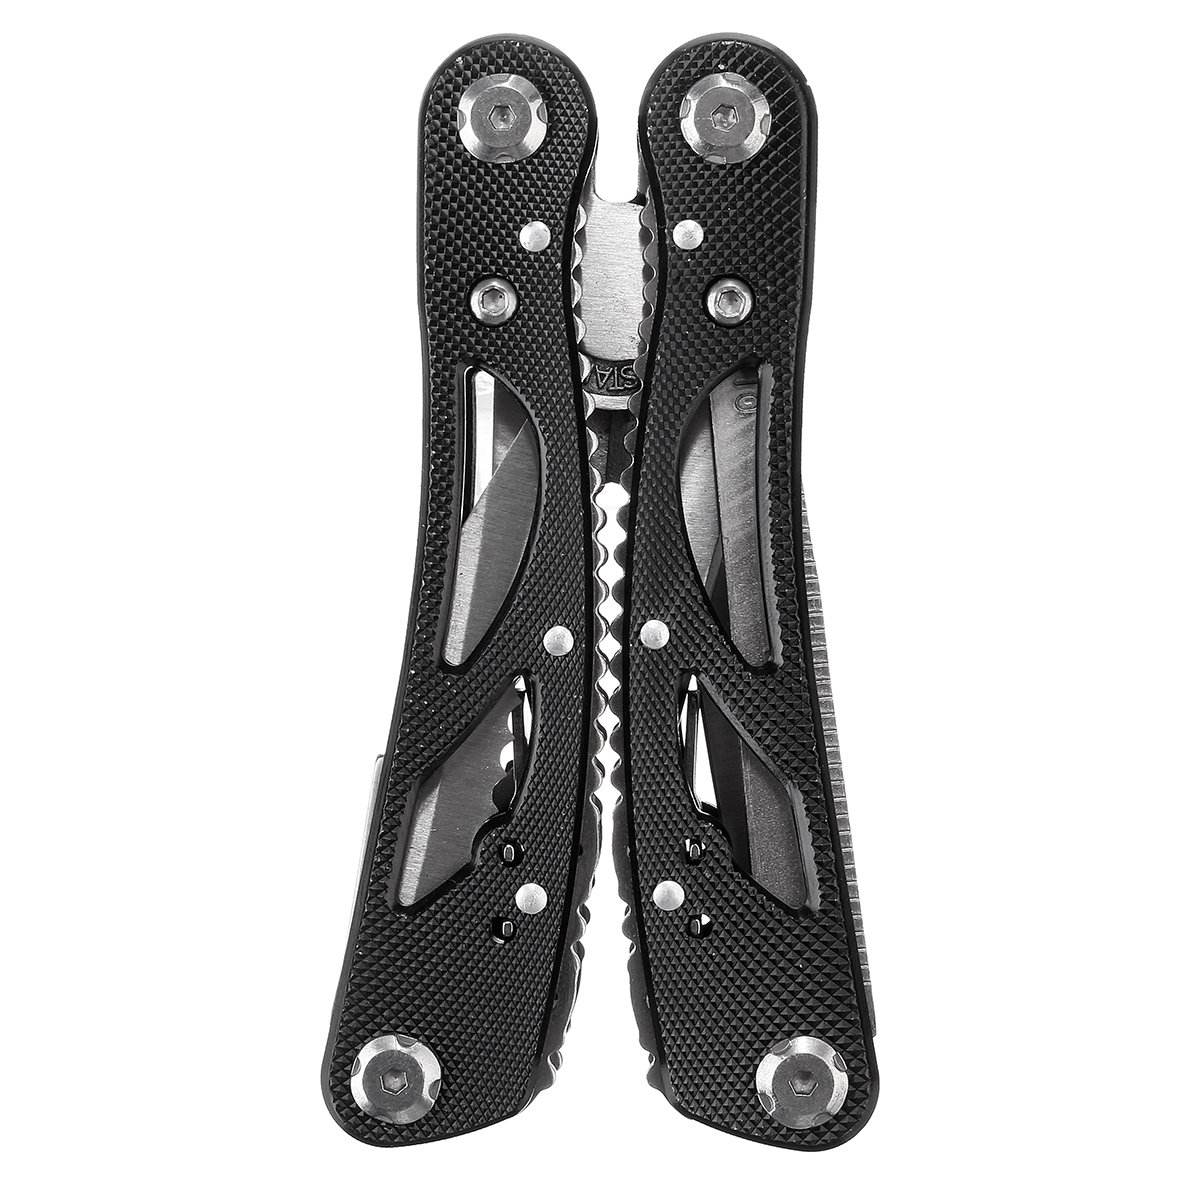 

24 in 1 Multi-function Pliers Tool For Outdoor Combination Hand Tools Working, Black